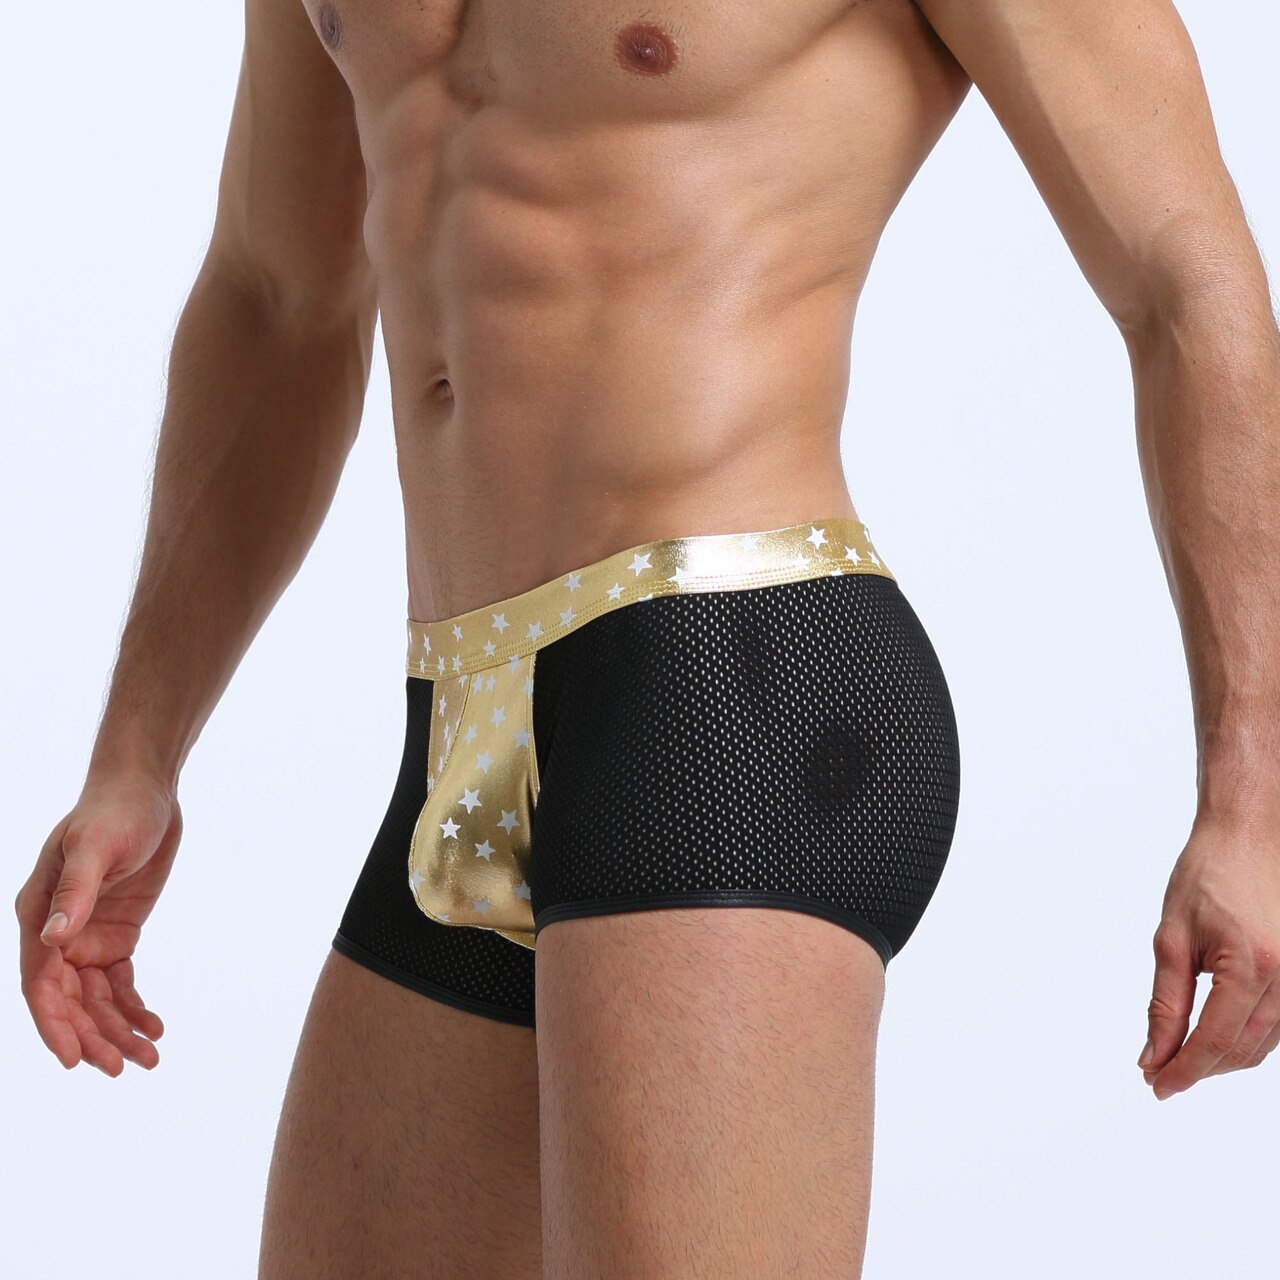 SALE - Mens Super Stars Shiny Metallic and Net Boxer Shorts Gold and Black